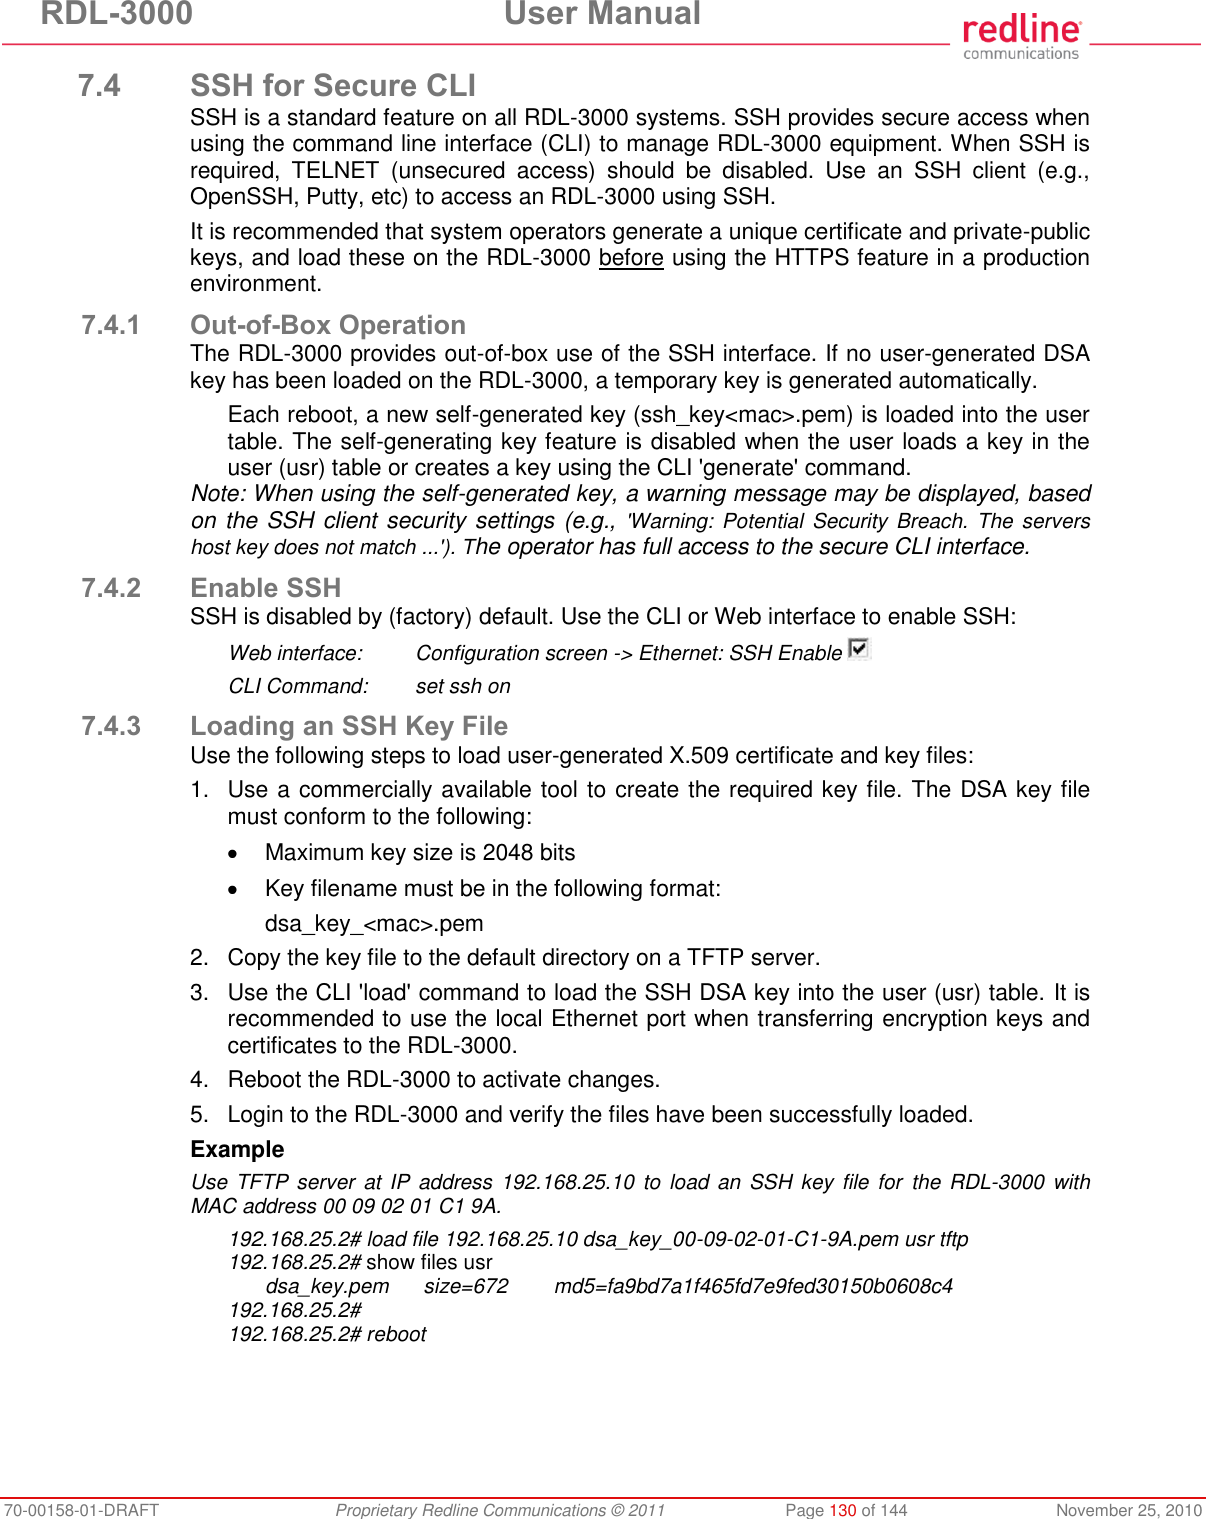 RDL-3000  User Manual 70-00158-01-DRAFT  Proprietary Redline Communications © 2011  Page 130 of 144  November 25, 2010 7.4 SSH for Secure CLI SSH is a standard feature on all RDL-3000 systems. SSH provides secure access when using the command line interface (CLI) to manage RDL-3000 equipment. When SSH is required,  TELNET  (unsecured  access)  should  be  disabled.  Use  an  SSH  client  (e.g., OpenSSH, Putty, etc) to access an RDL-3000 using SSH. It is recommended that system operators generate a unique certificate and private-public keys, and load these on the RDL-3000 before using the HTTPS feature in a production environment. 7.4.1 Out-of-Box Operation The RDL-3000 provides out-of-box use of the SSH interface. If no user-generated DSA key has been loaded on the RDL-3000, a temporary key is generated automatically. Each reboot, a new self-generated key (ssh_key&lt;mac&gt;.pem) is loaded into the user table. The self-generating key feature is disabled when the user loads a key in the user (usr) table or creates a key using the CLI &apos;generate&apos; command. Note: When using the self-generated key, a warning message may be displayed, based on the SSH client security settings (e.g., &apos;Warning:  Potential  Security  Breach.  The  servers host key does not match ...&apos;). The operator has full access to the secure CLI interface. 7.4.2 Enable SSH SSH is disabled by (factory) default. Use the CLI or Web interface to enable SSH: Web interface:  Configuration screen -&gt; Ethernet: SSH Enable   CLI Command:  set ssh on 7.4.3 Loading an SSH Key File Use the following steps to load user-generated X.509 certificate and key files: 1.  Use a commercially available tool to create the required key file. The DSA key file must conform to the following:   Maximum key size is 2048 bits  Key filename must be in the following format: dsa_key_&lt;mac&gt;.pem 2.  Copy the key file to the default directory on a TFTP server. 3.  Use the CLI &apos;load&apos; command to load the SSH DSA key into the user (usr) table. It is recommended to use the local Ethernet port when transferring encryption keys and certificates to the RDL-3000. 4.  Reboot the RDL-3000 to activate changes. 5.  Login to the RDL-3000 and verify the files have been successfully loaded. Example Use TFTP  server  at IP address 192.168.25.10 to load  an  SSH key file  for  the  RDL-3000  with MAC address 00 09 02 01 C1 9A. 192.168.25.2# load file 192.168.25.10 dsa_key_00-09-02-01-C1-9A.pem usr tftp 192.168.25.2# show files usr   dsa_key.pem      size=672        md5=fa9bd7a1f465fd7e9fed30150b0608c4 192.168.25.2# 192.168.25.2# reboot 